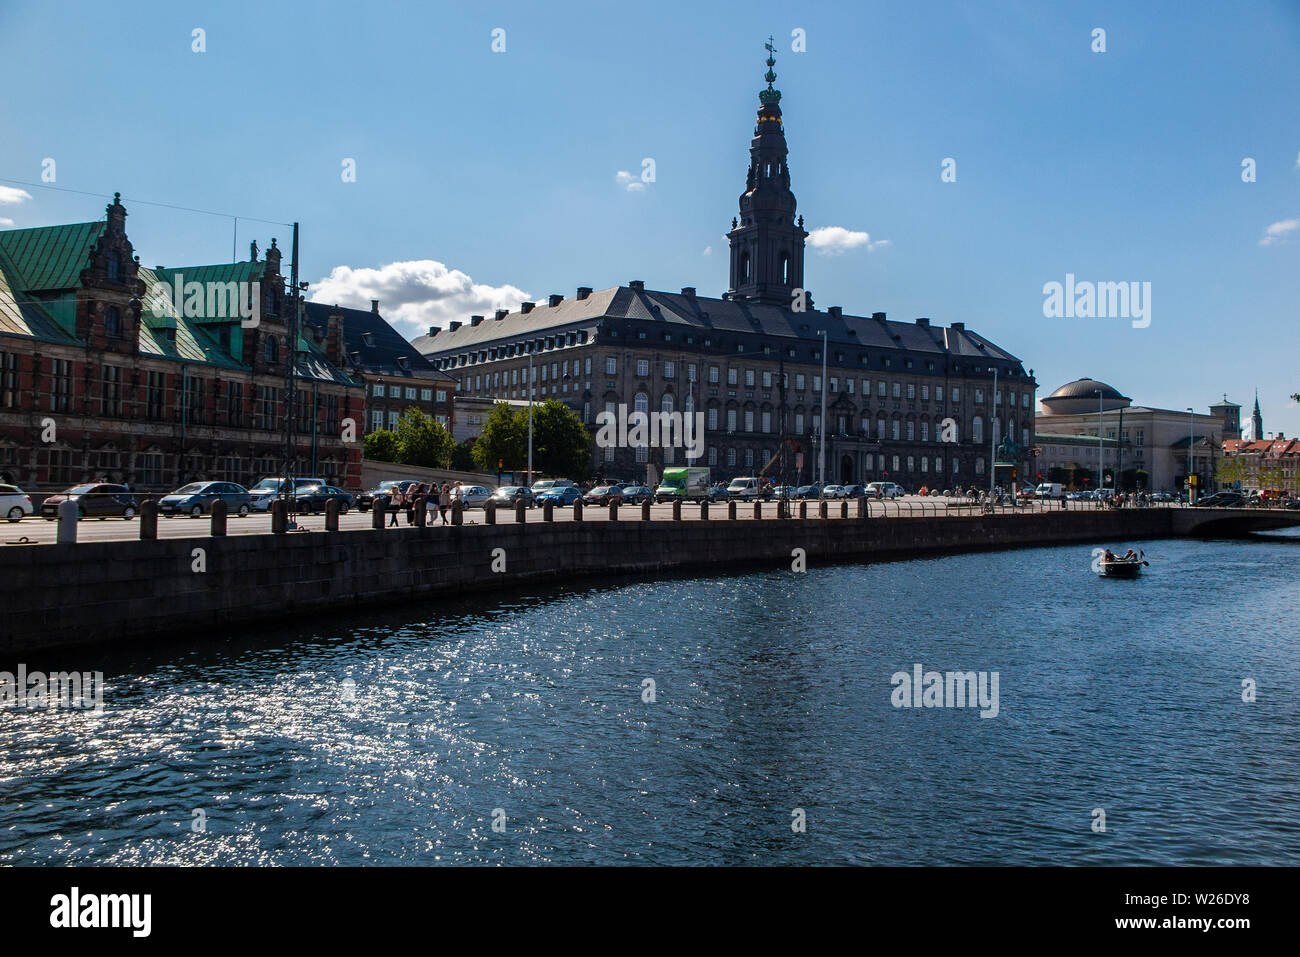 The famous Christiansborg palace in Copenhagen, Denmark. THis is the seat of parliament on Slotsholmen. Stock Photo